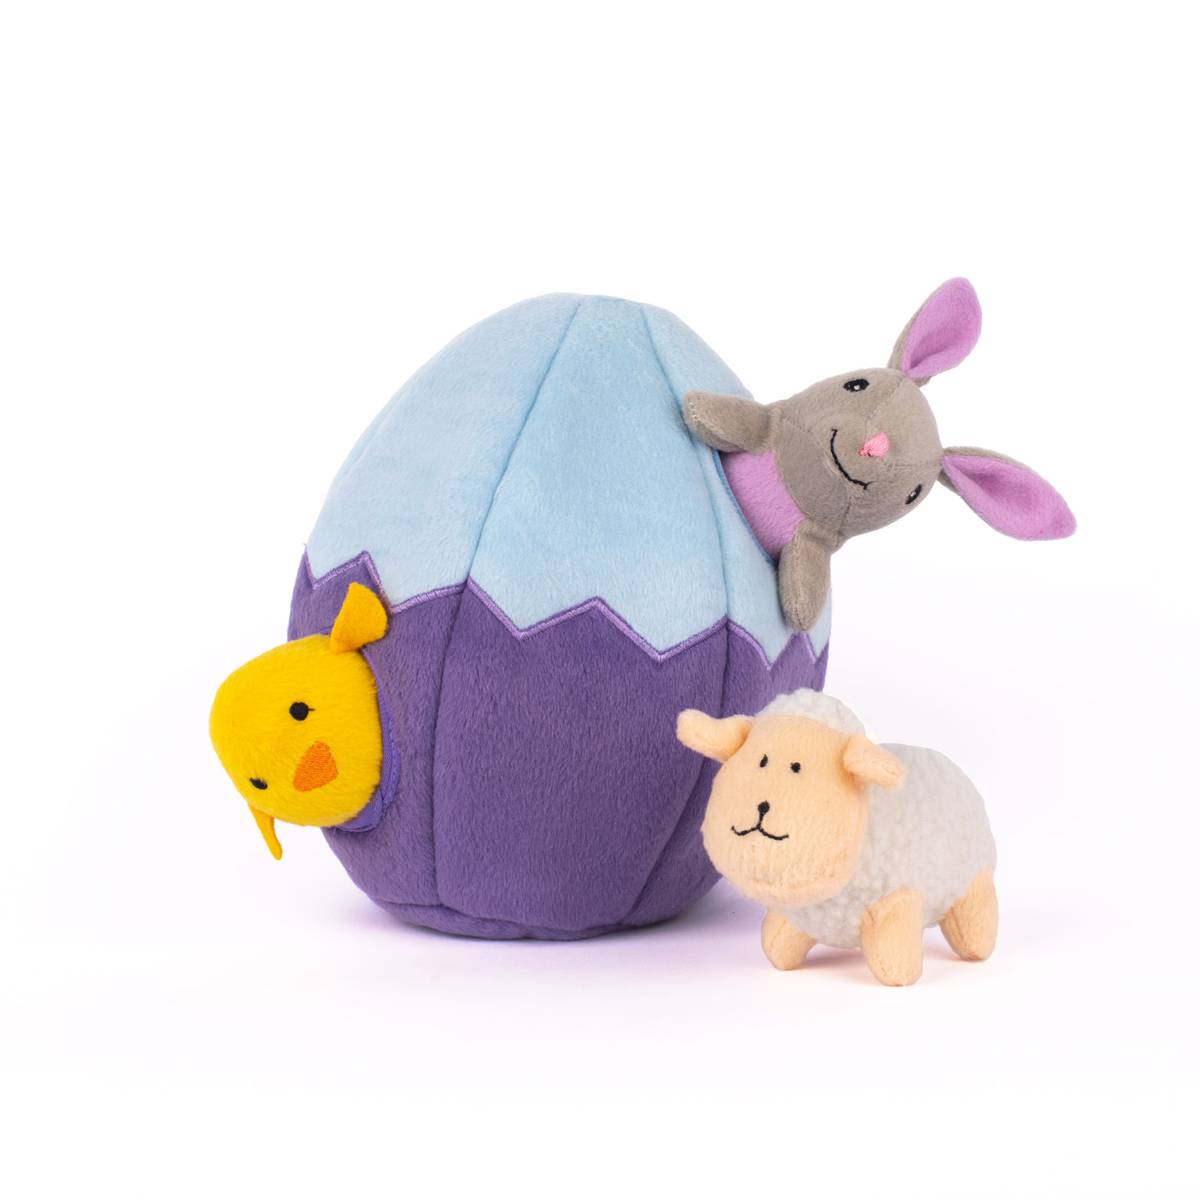 Easter Egg & Friends Burrow Toy | Pawlicious & Company